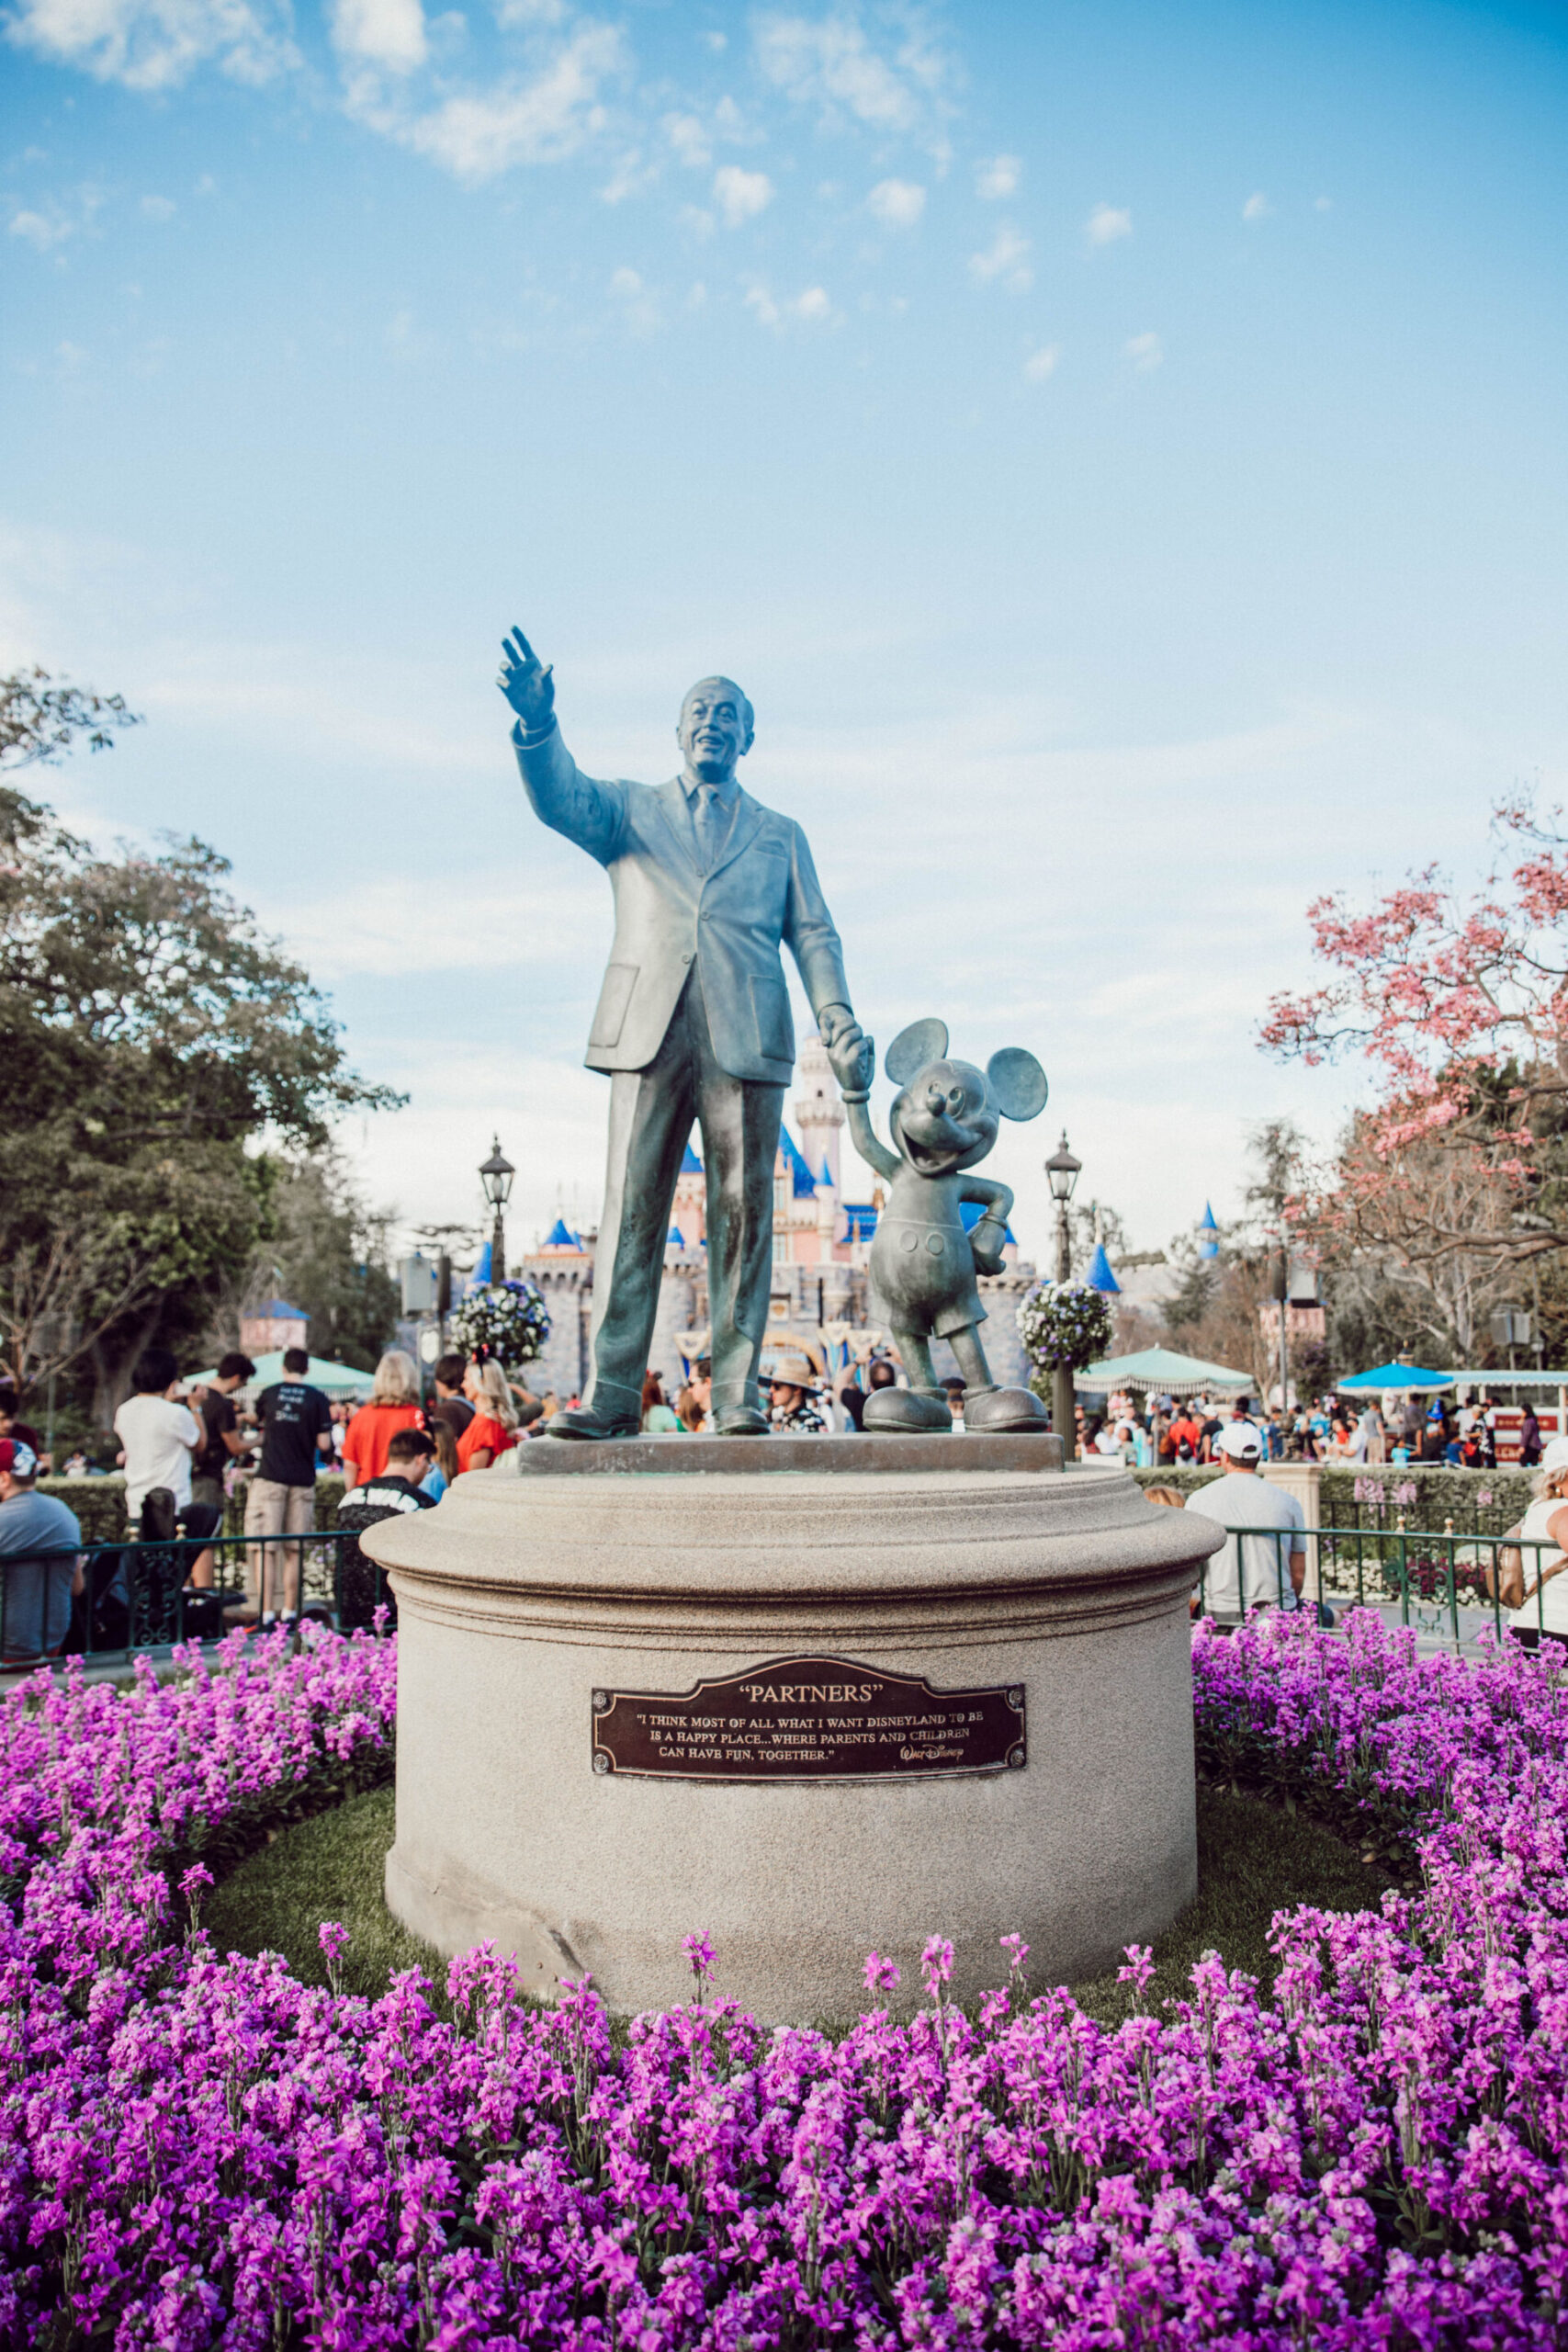 Partners statue of Walt Disney holding hands with Mickey Mouse in front of Sleeping Beauty Castle at Disneyland California, surrounded by purple flowers and visitors.